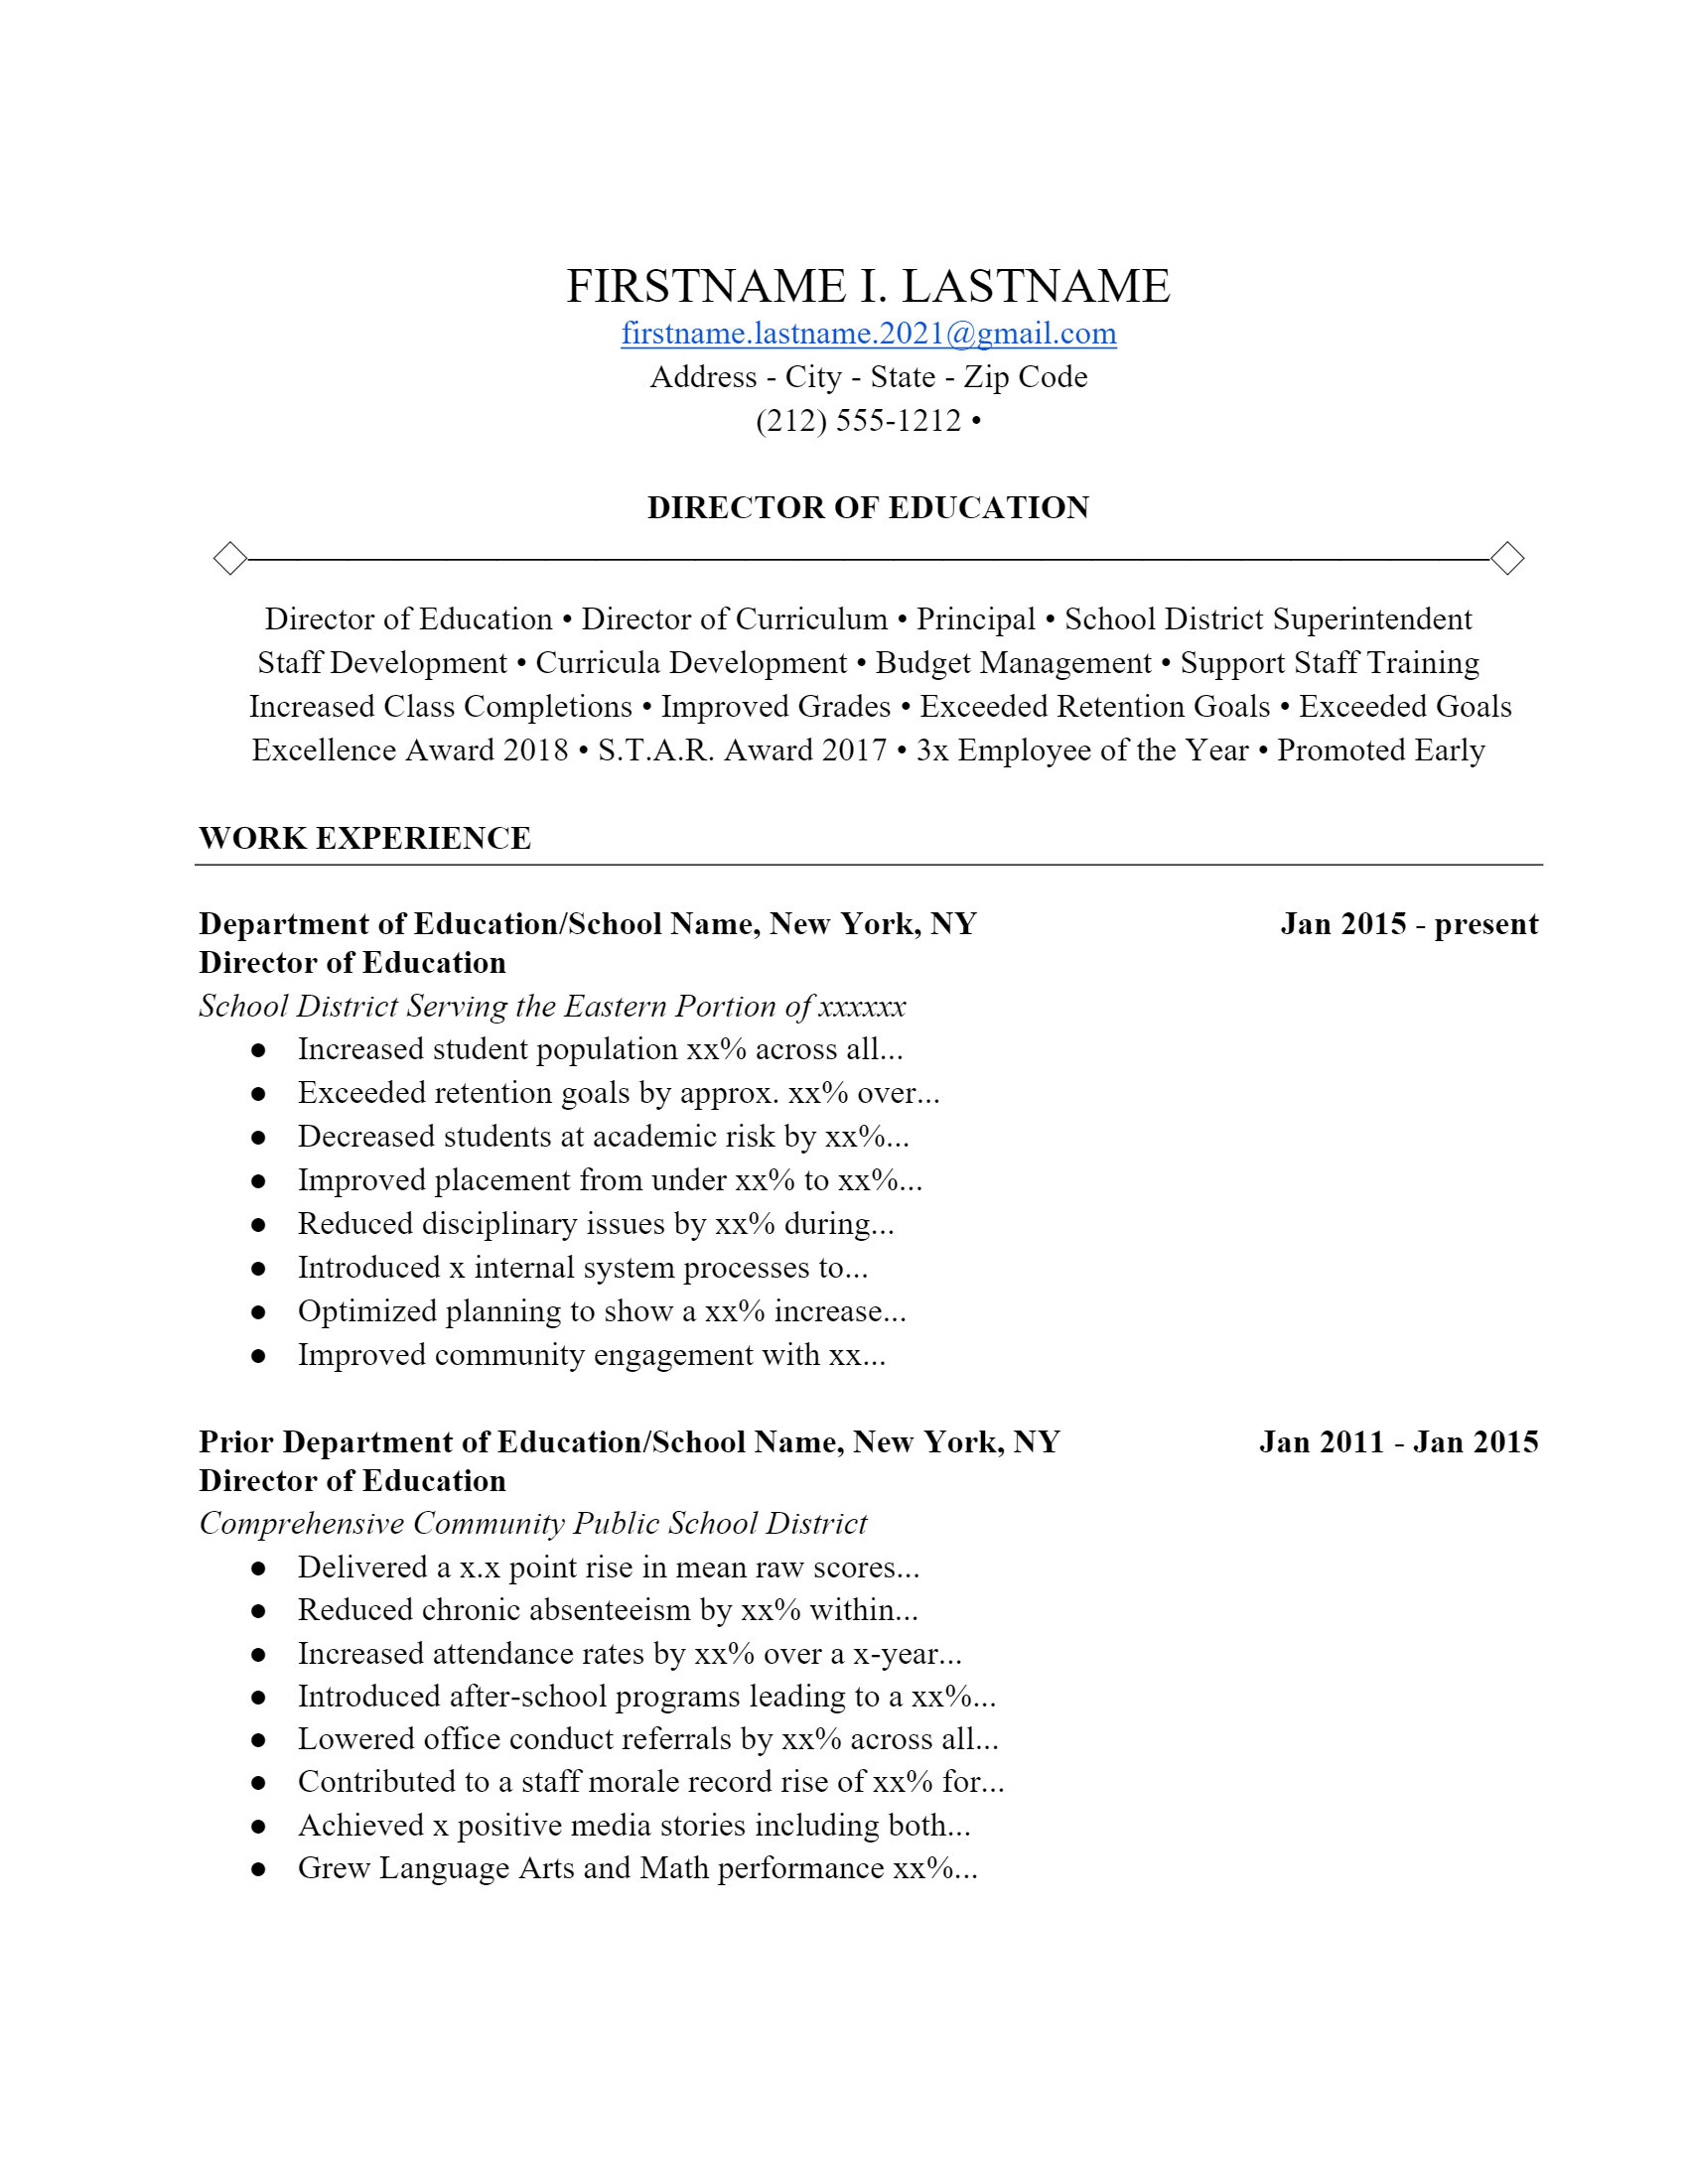 Education director Resume .Docx (Word)